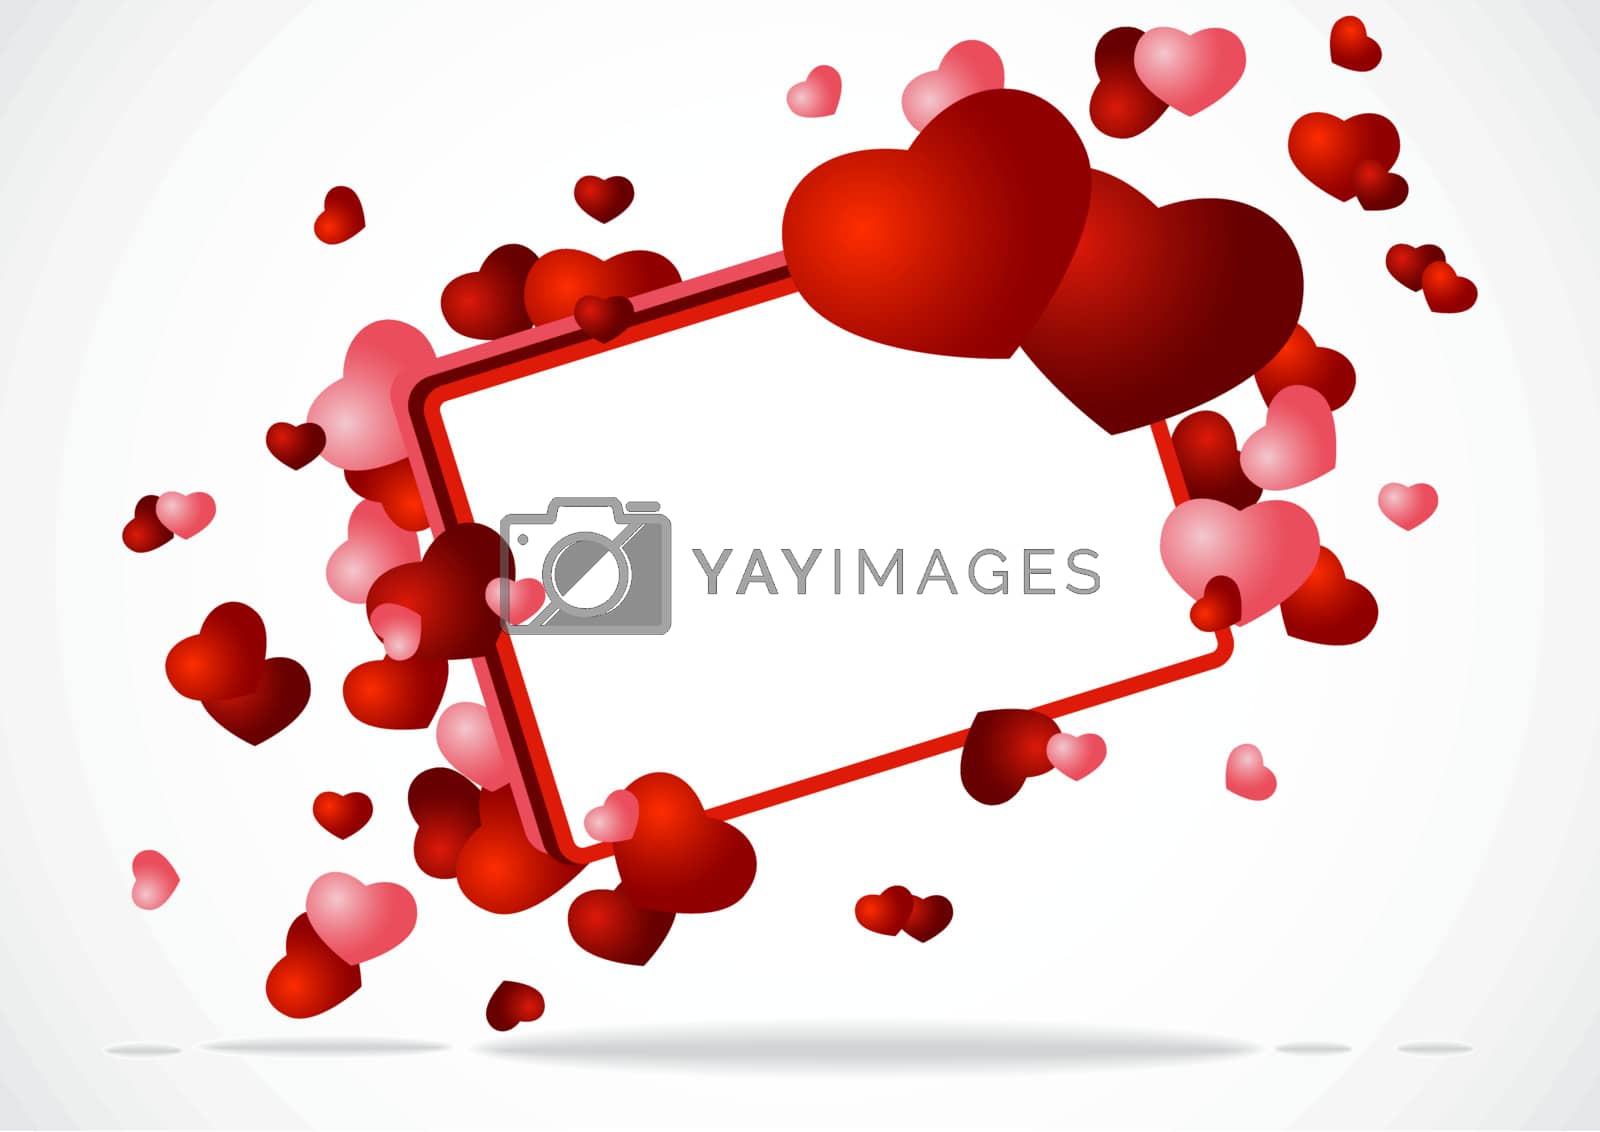 Royalty free image of Greeting card with two hearts by rodakm